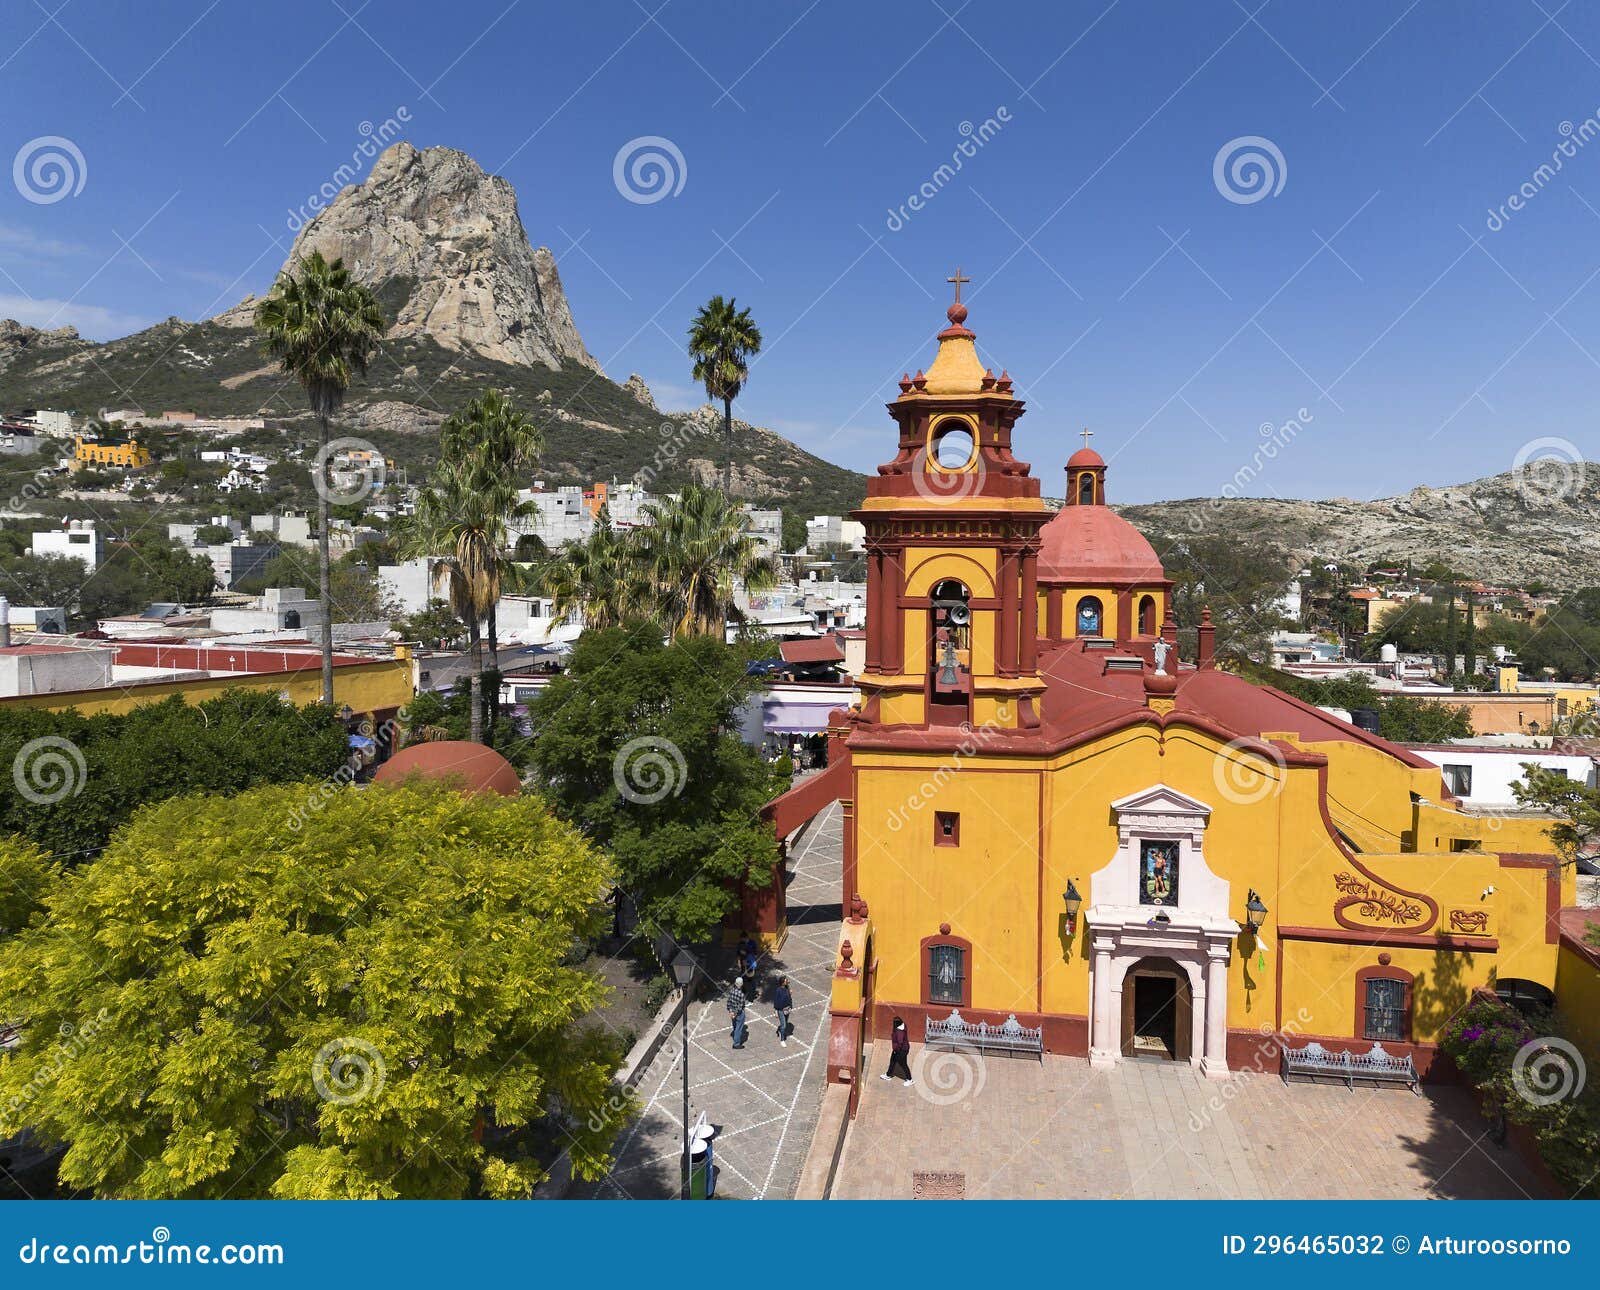 in the town of bernal the main church and the monolith